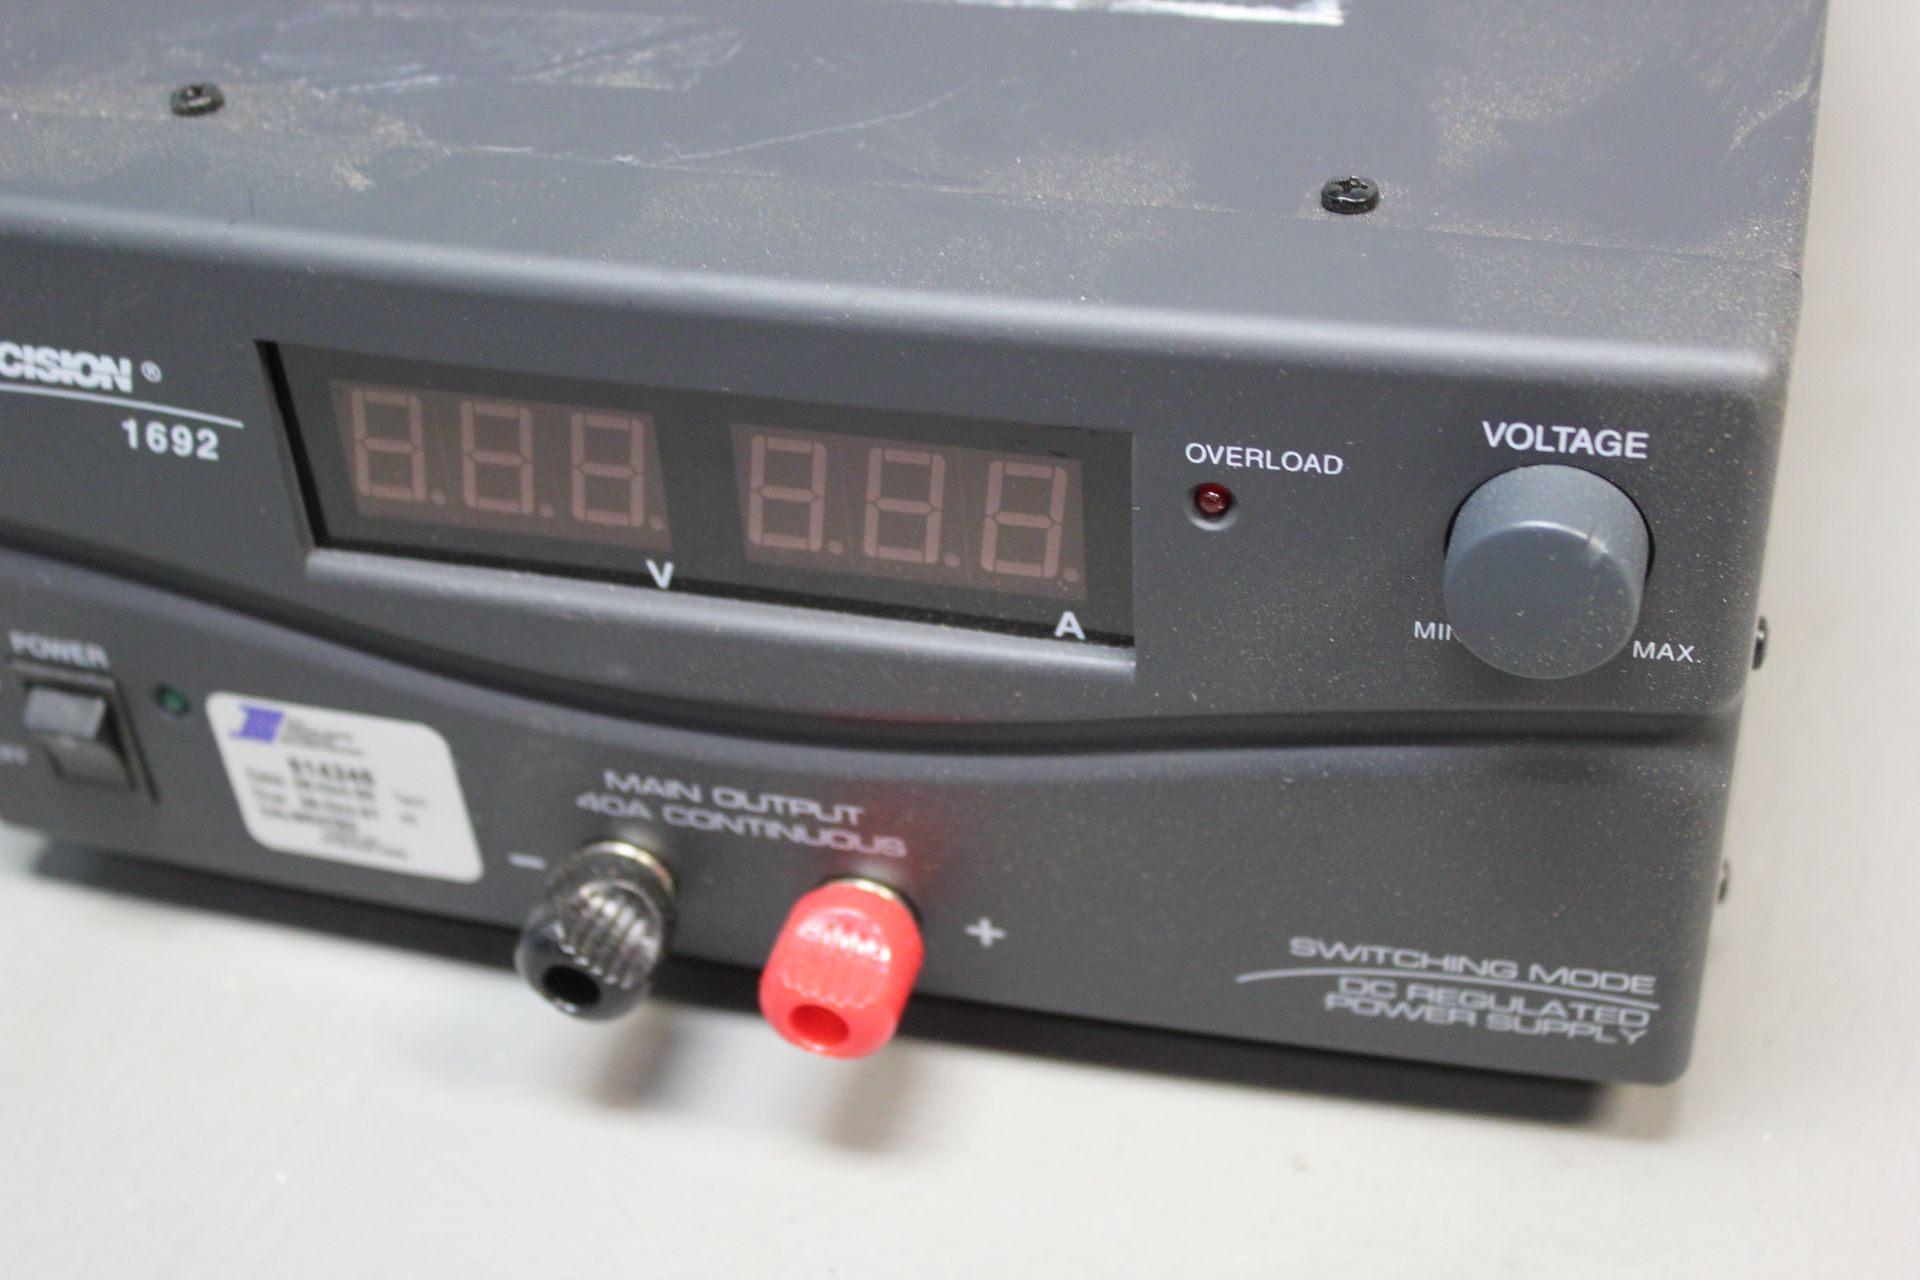 BK PRECISION DC REGULATED POWER SUPPLY - Image 3 of 6